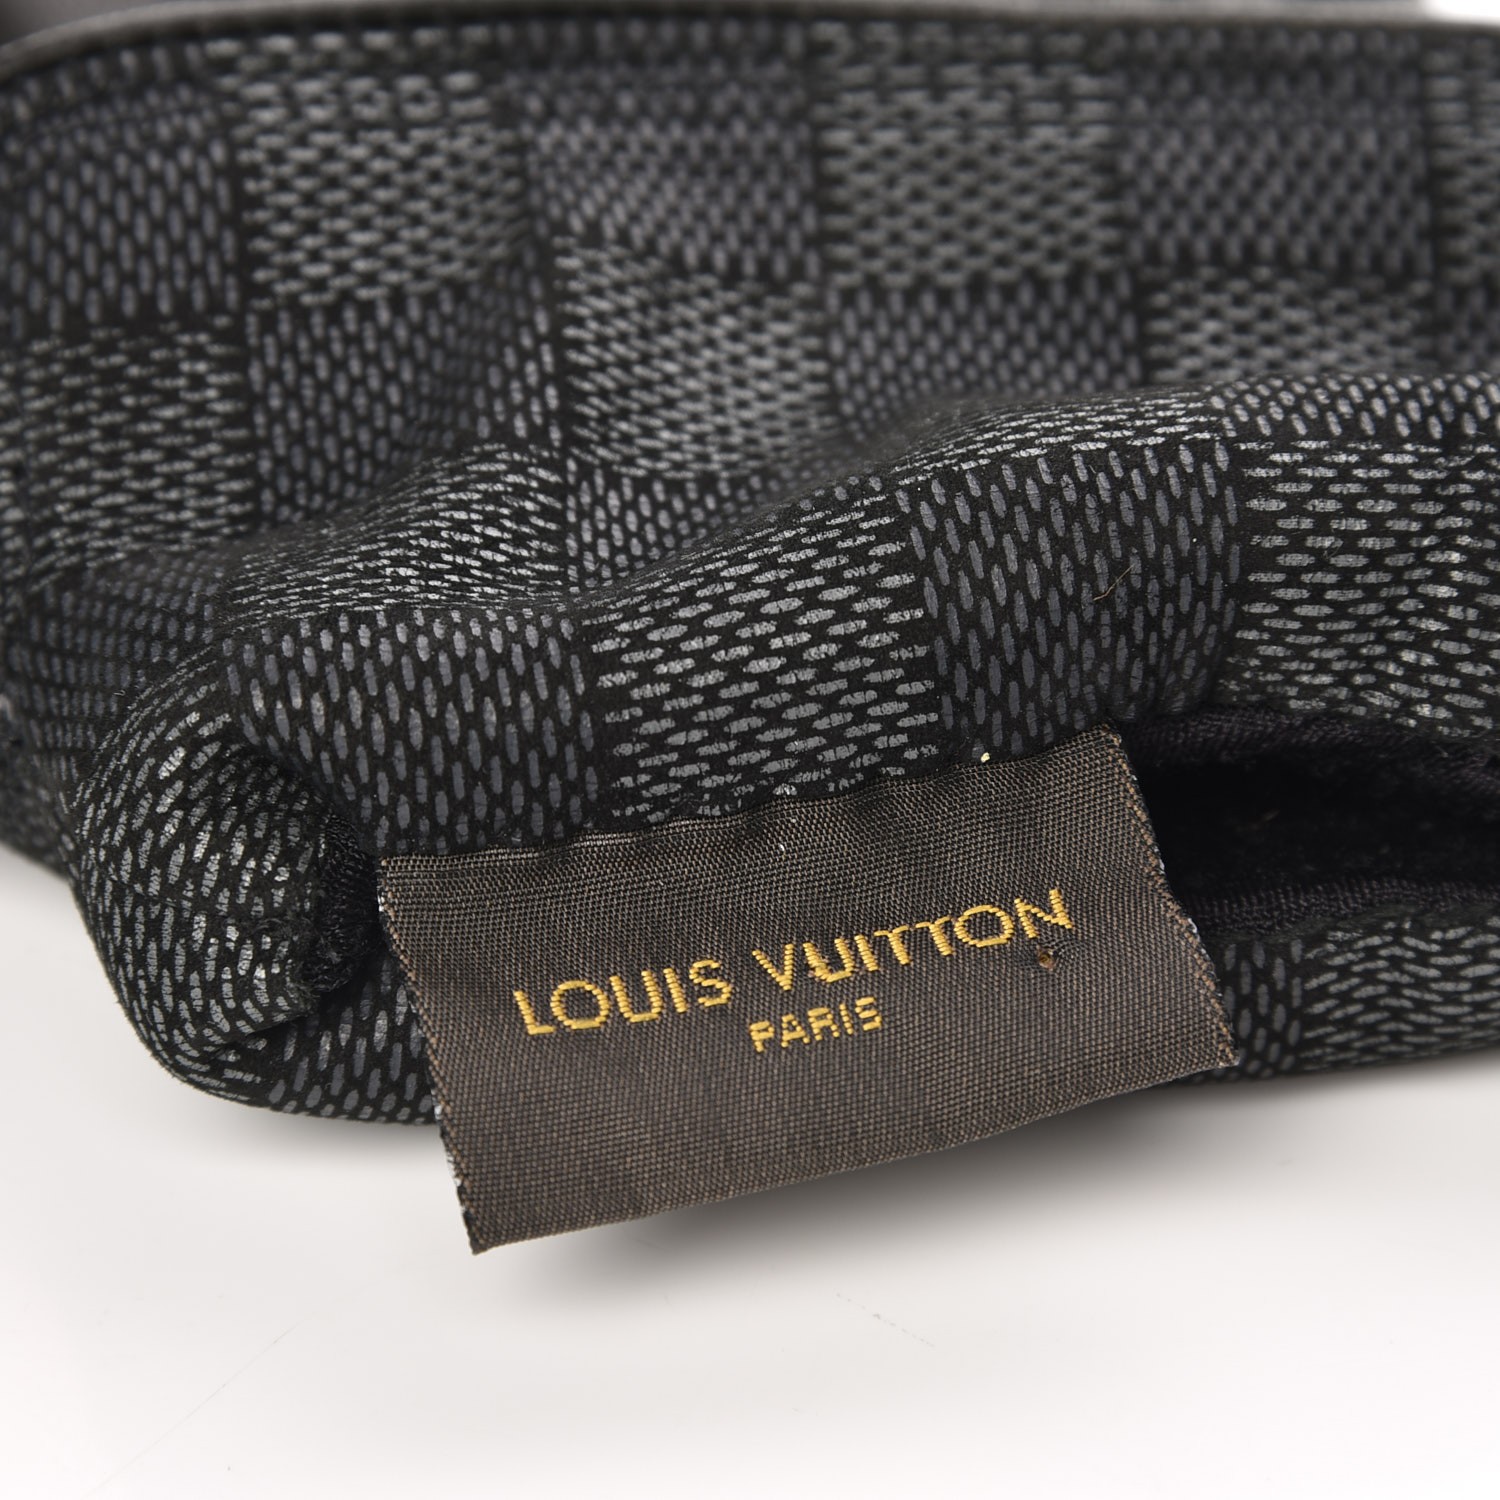 Louis Vuitton - Gloves - for MEN online on Kate&You - M73450 K&Y4662